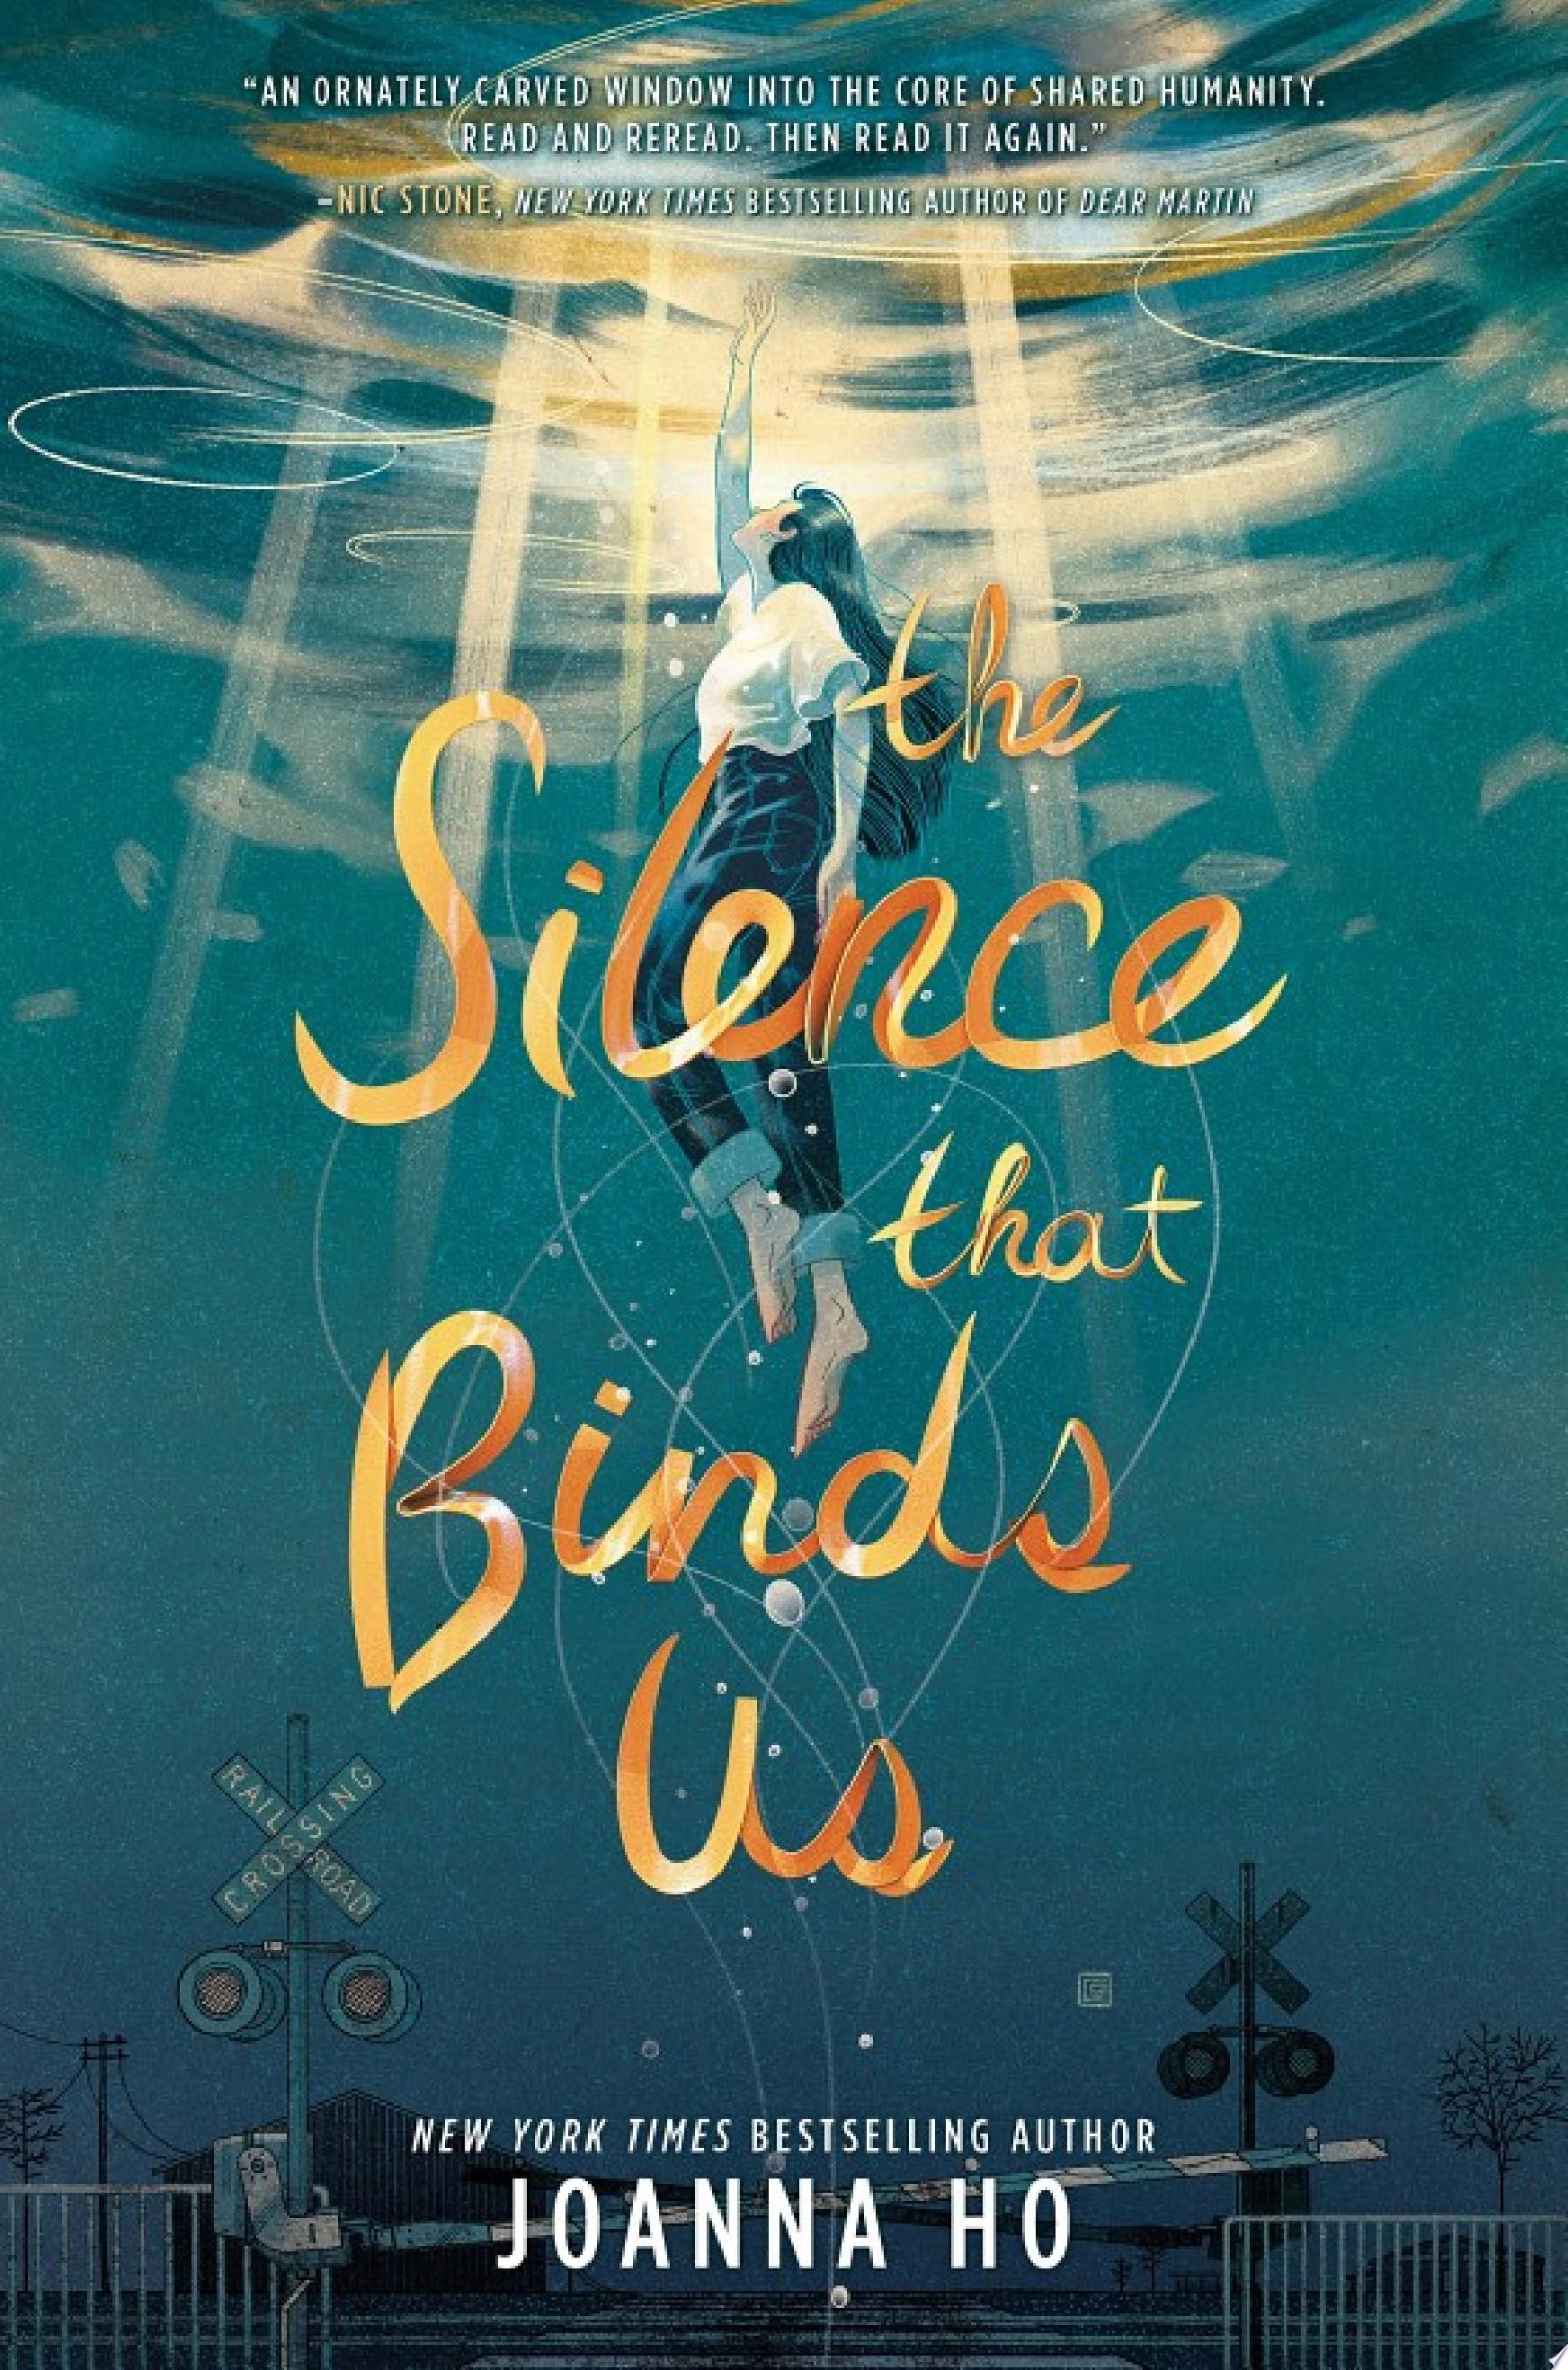 Image for "The Silence that Binds Us"